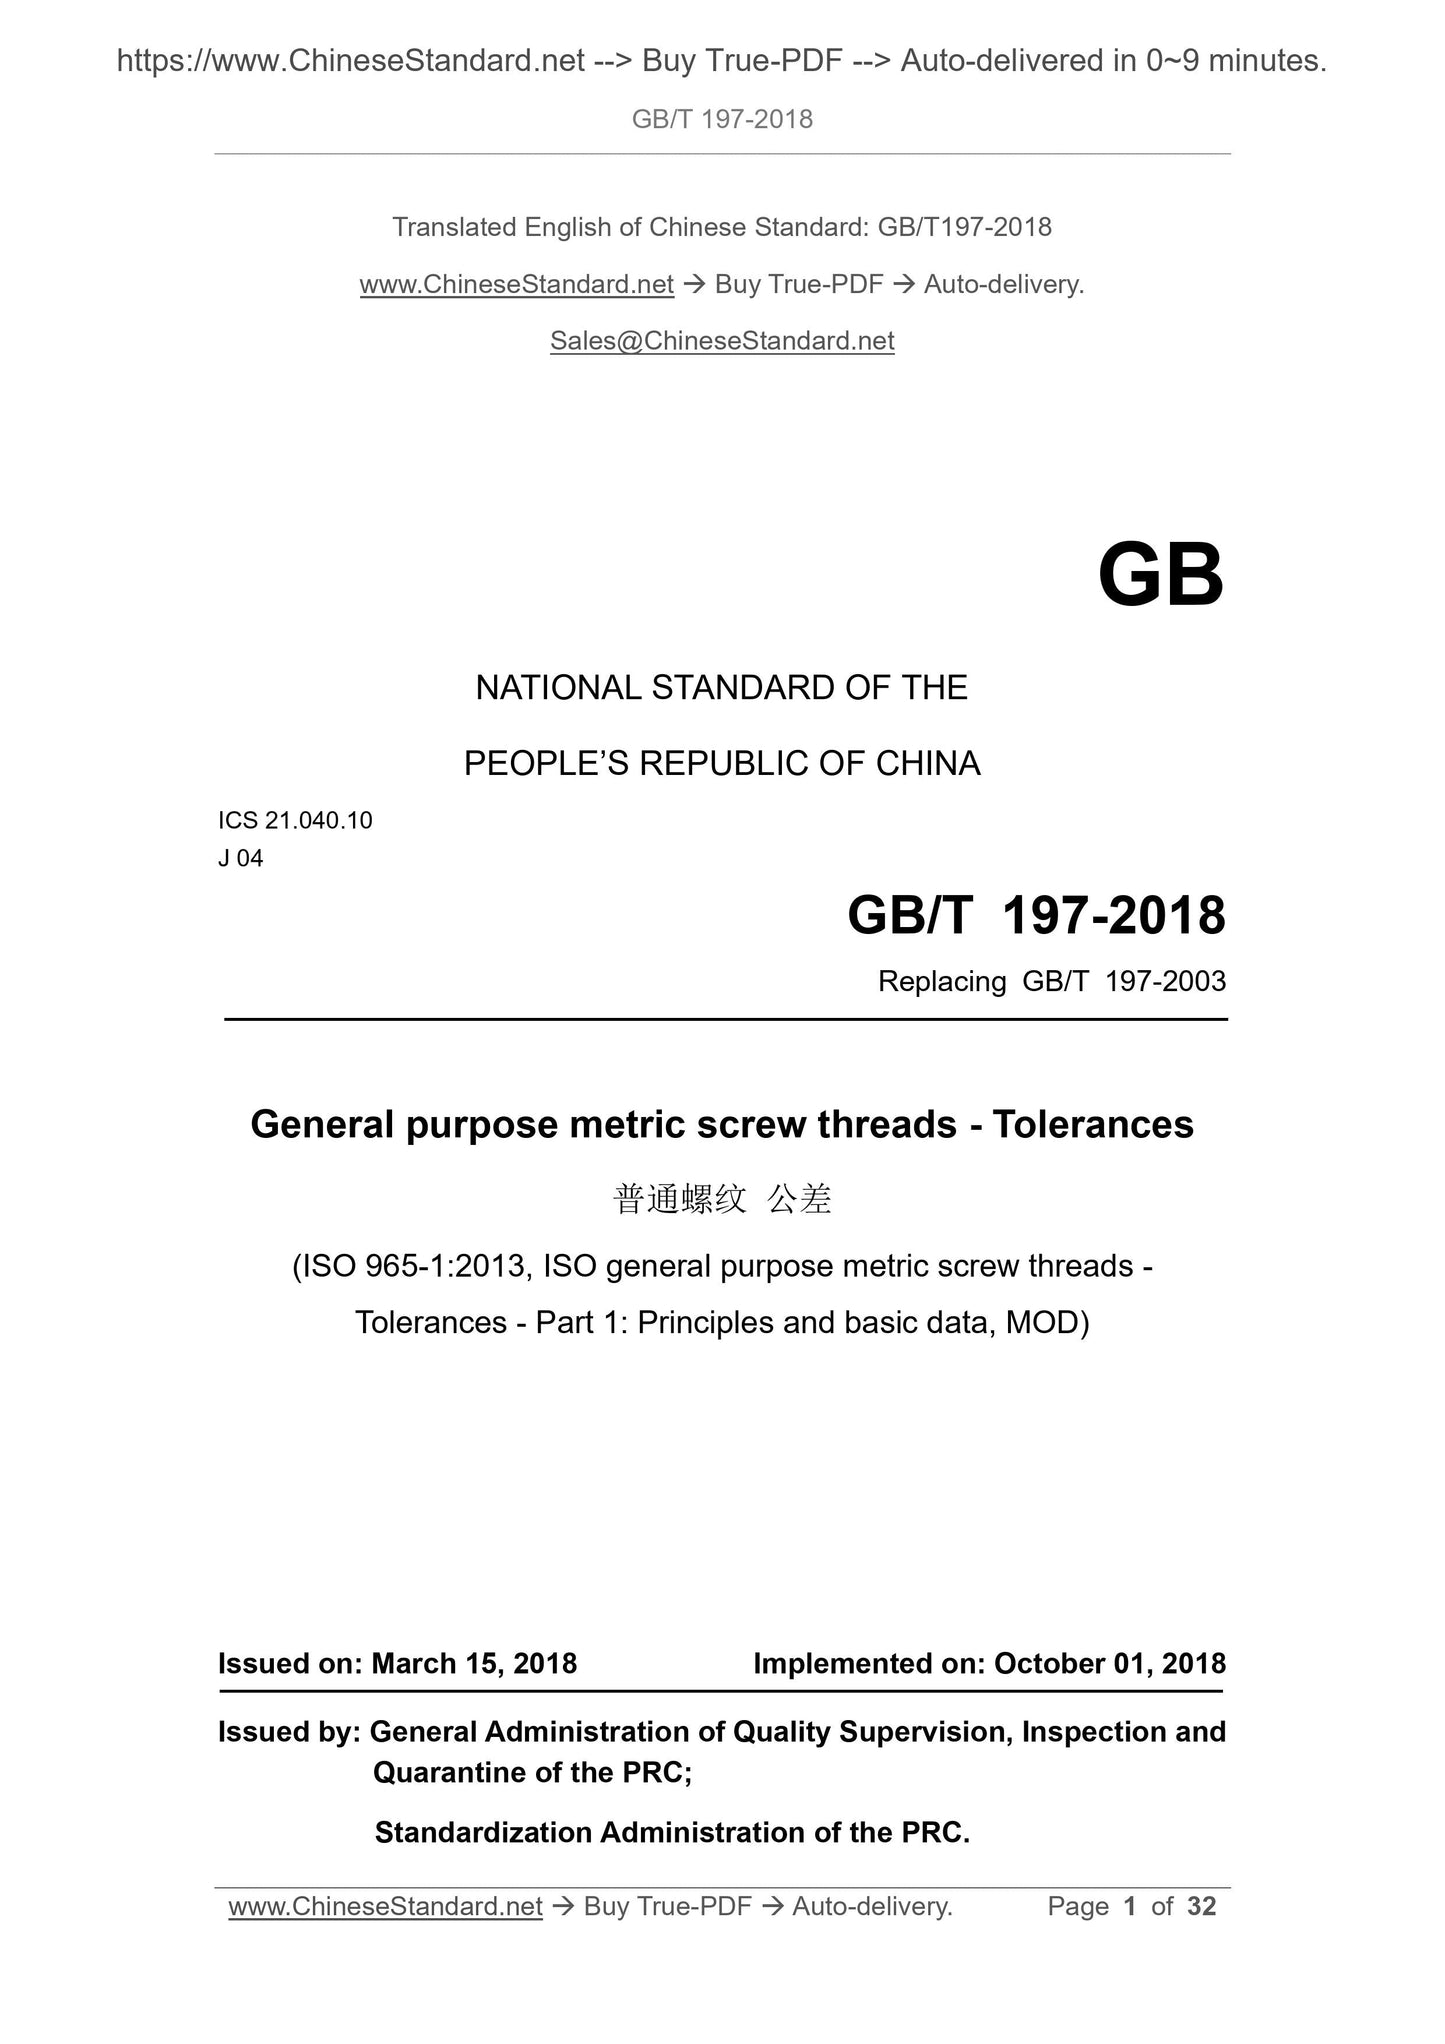 GB/T 197-2018 Page 1